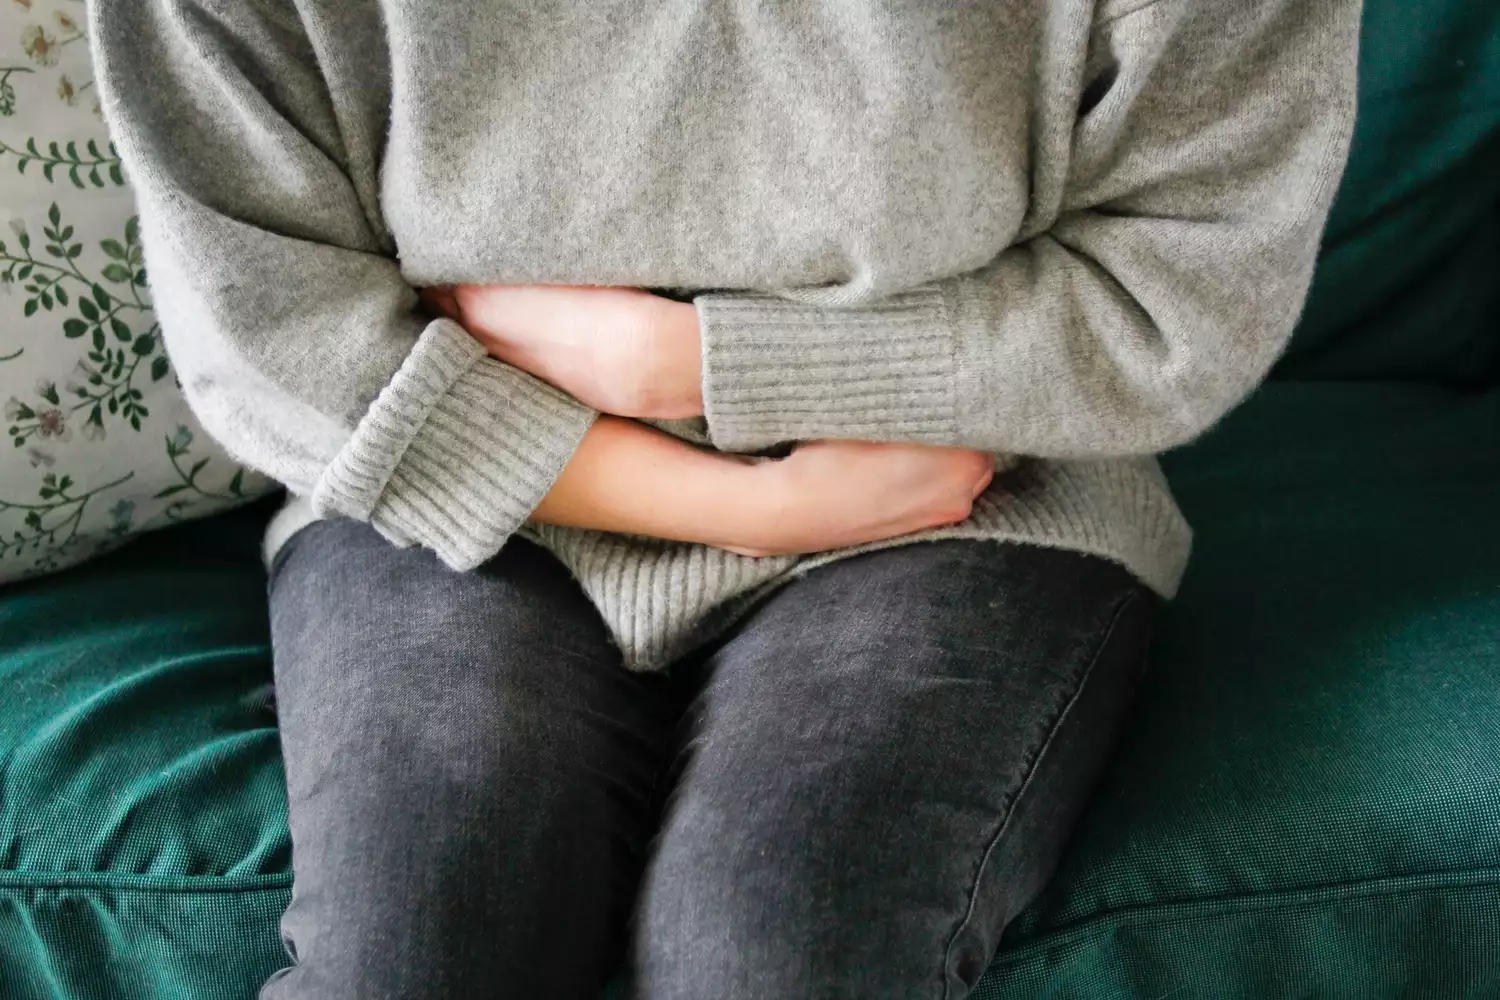 A person sitting on a sofa experiencing bloating after eating.